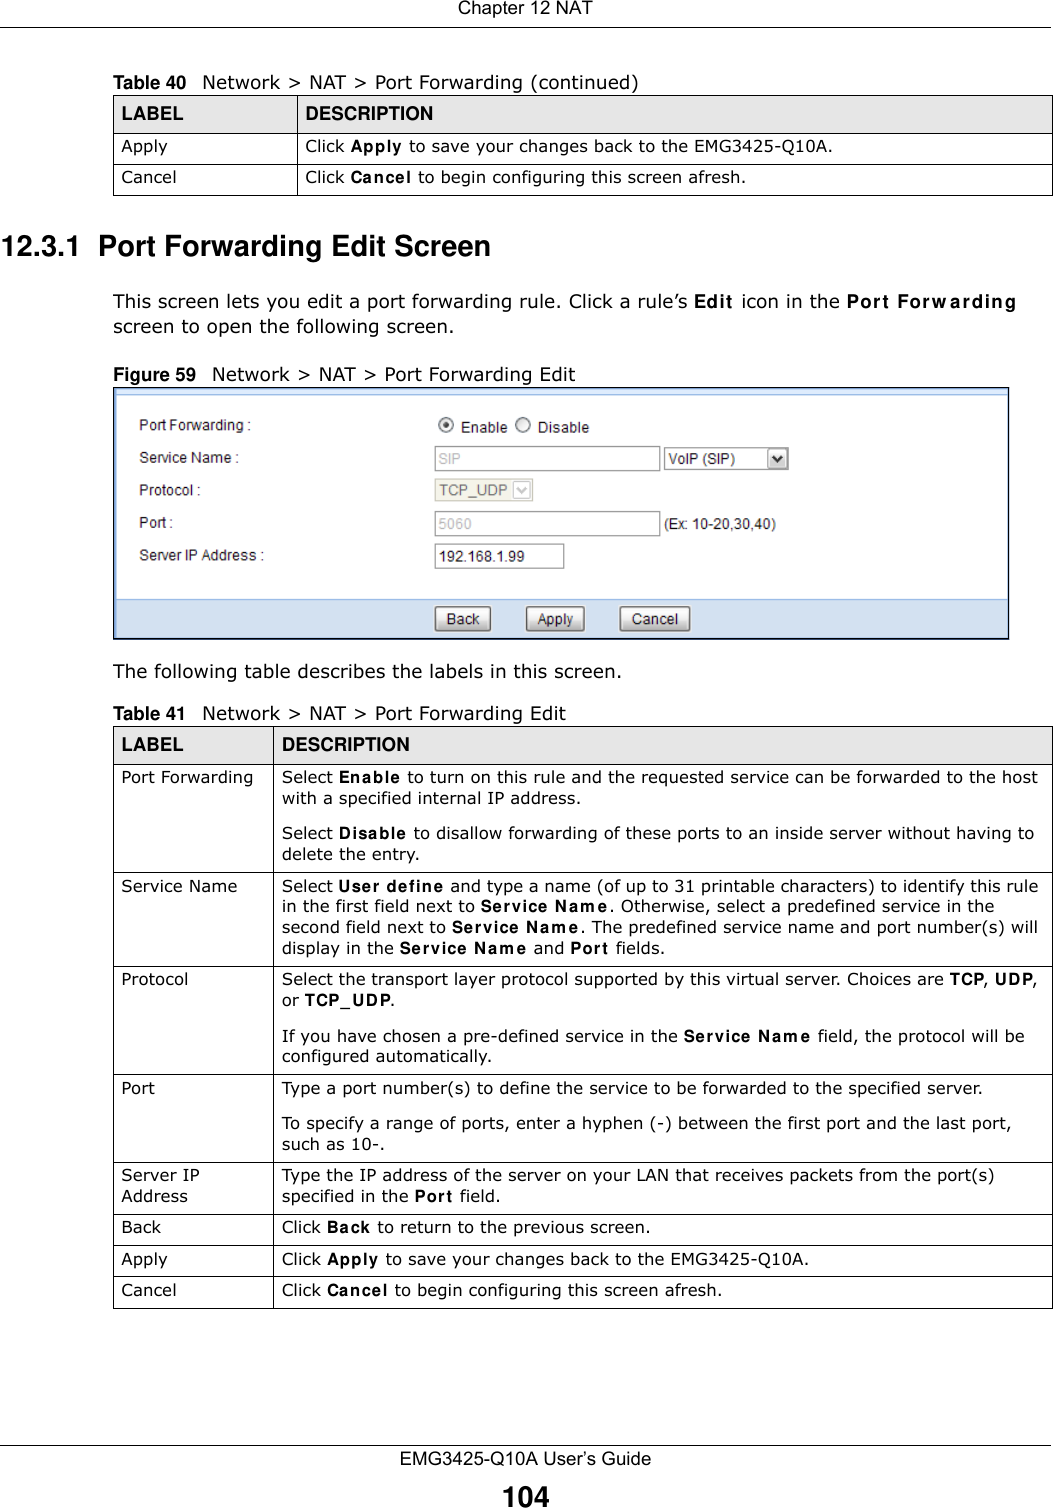 Chapter 12 NATEMG3425-Q10A User’s Guide10412.3.1  Port Forwarding Edit Screen This screen lets you edit a port forwarding rule. Click a rule’s Edit  icon in the Por t  For w a rding screen to open the following screen.Figure 59   Network &gt; NAT &gt; Port Forwarding Edit The following table describes the labels in this screen. Apply Click Apply to save your changes back to the EMG3425-Q10A.Cancel Click Can cel to begin configuring this screen afresh.Table 40   Network &gt; NAT &gt; Port Forwarding (continued)LABEL DESCRIPTIONTable 41   Network &gt; NAT &gt; Port Forwarding EditLABEL DESCRIPTIONPort Forwarding Select Enable to turn on this rule and the requested service can be forwarded to the host with a specified internal IP address.Select Disable  to disallow forwarding of these ports to an inside server without having to delete the entry. Service Name Select Use r define and type a name (of up to 31 printable characters) to identify this rule in the first field next to Service Nam e. Otherwise, select a predefined service in the second field next to Se r vice  N a m e. The predefined service name and port number(s) will display in the Se r vice N a m e  and Port fields.Protocol Select the transport layer protocol supported by this virtual server. Choices are TCP, UDP, or TCP_ UD P. If you have chosen a pre-defined service in the Se r vice Nam e  field, the protocol will be configured automatically.Port Type a port number(s) to define the service to be forwarded to the specified server.To specify a range of ports, enter a hyphen (-) between the first port and the last port, such as 10-.Server IP AddressType the IP address of the server on your LAN that receives packets from the port(s) specified in the Port field.Back Click Ba ck to return to the previous screen.Apply Click Apply  to save your changes back to the EMG3425-Q10A.Cancel Click Cancel to begin configuring this screen afresh.